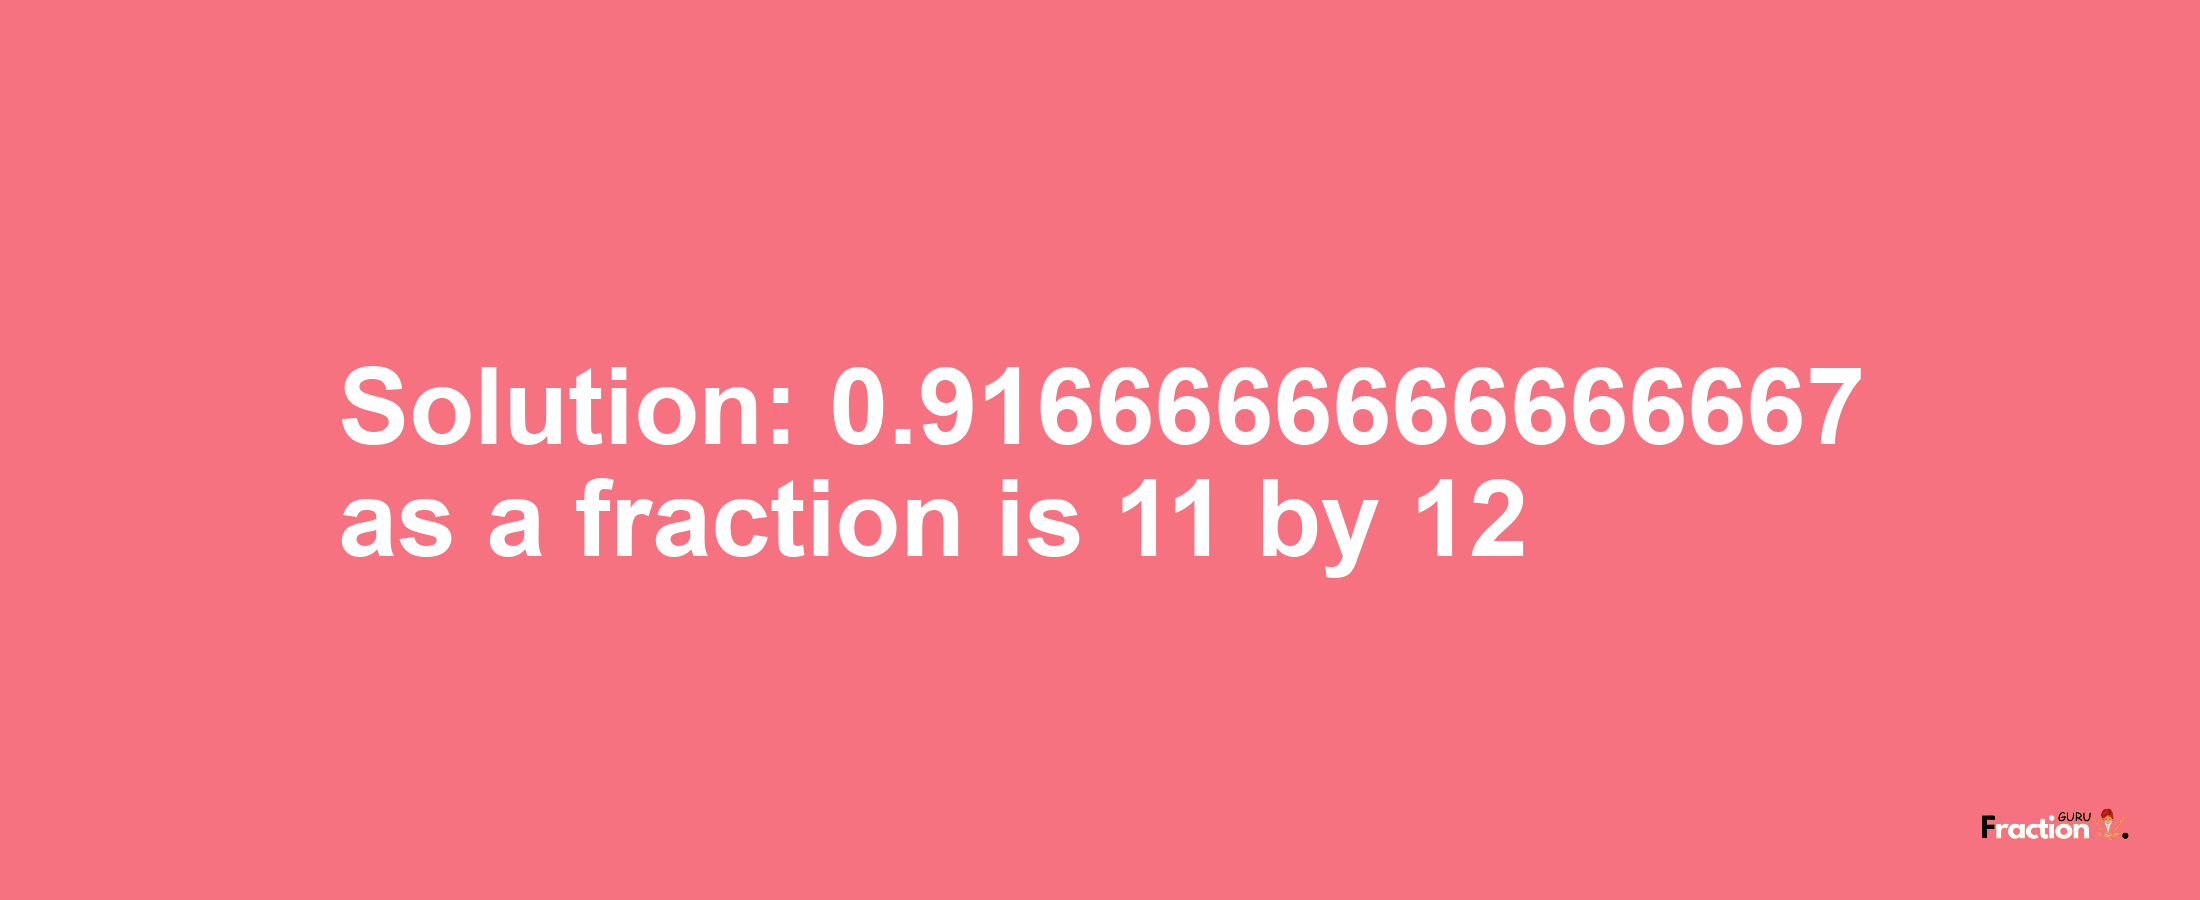 Solution:0.9166666666666667 as a fraction is 11/12